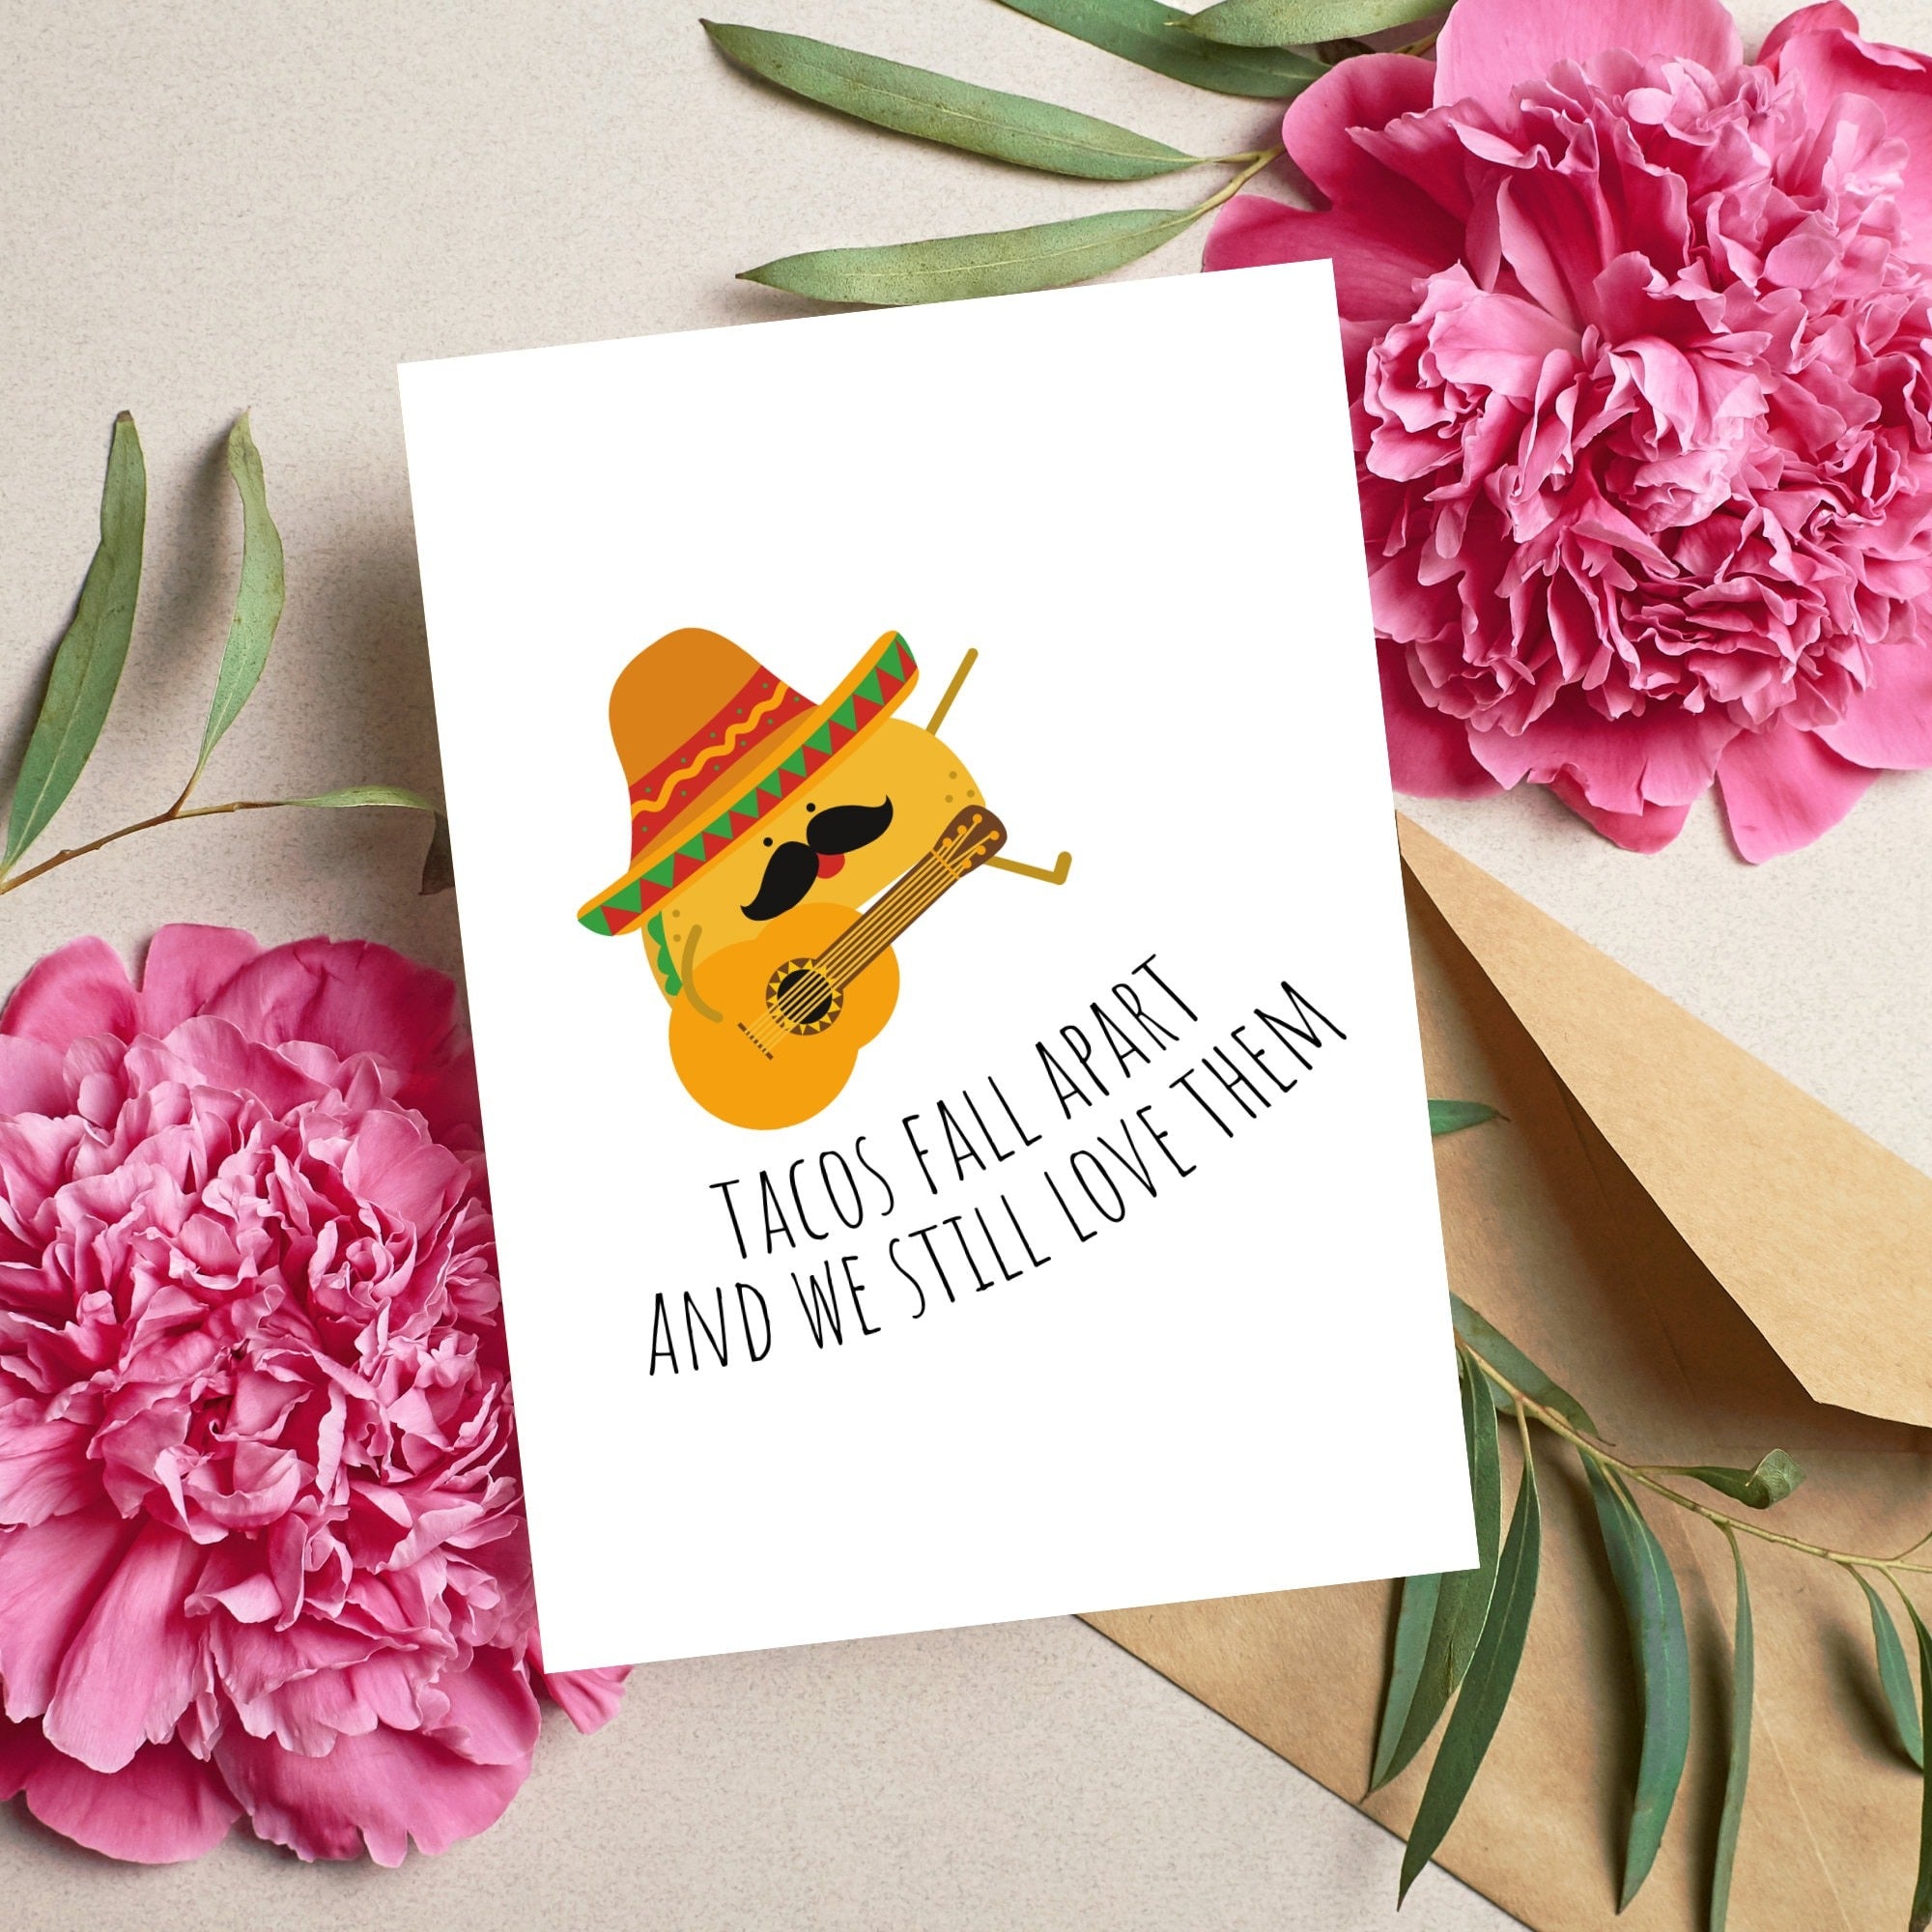 Tacos Fall Apart And We Still Love Them Card